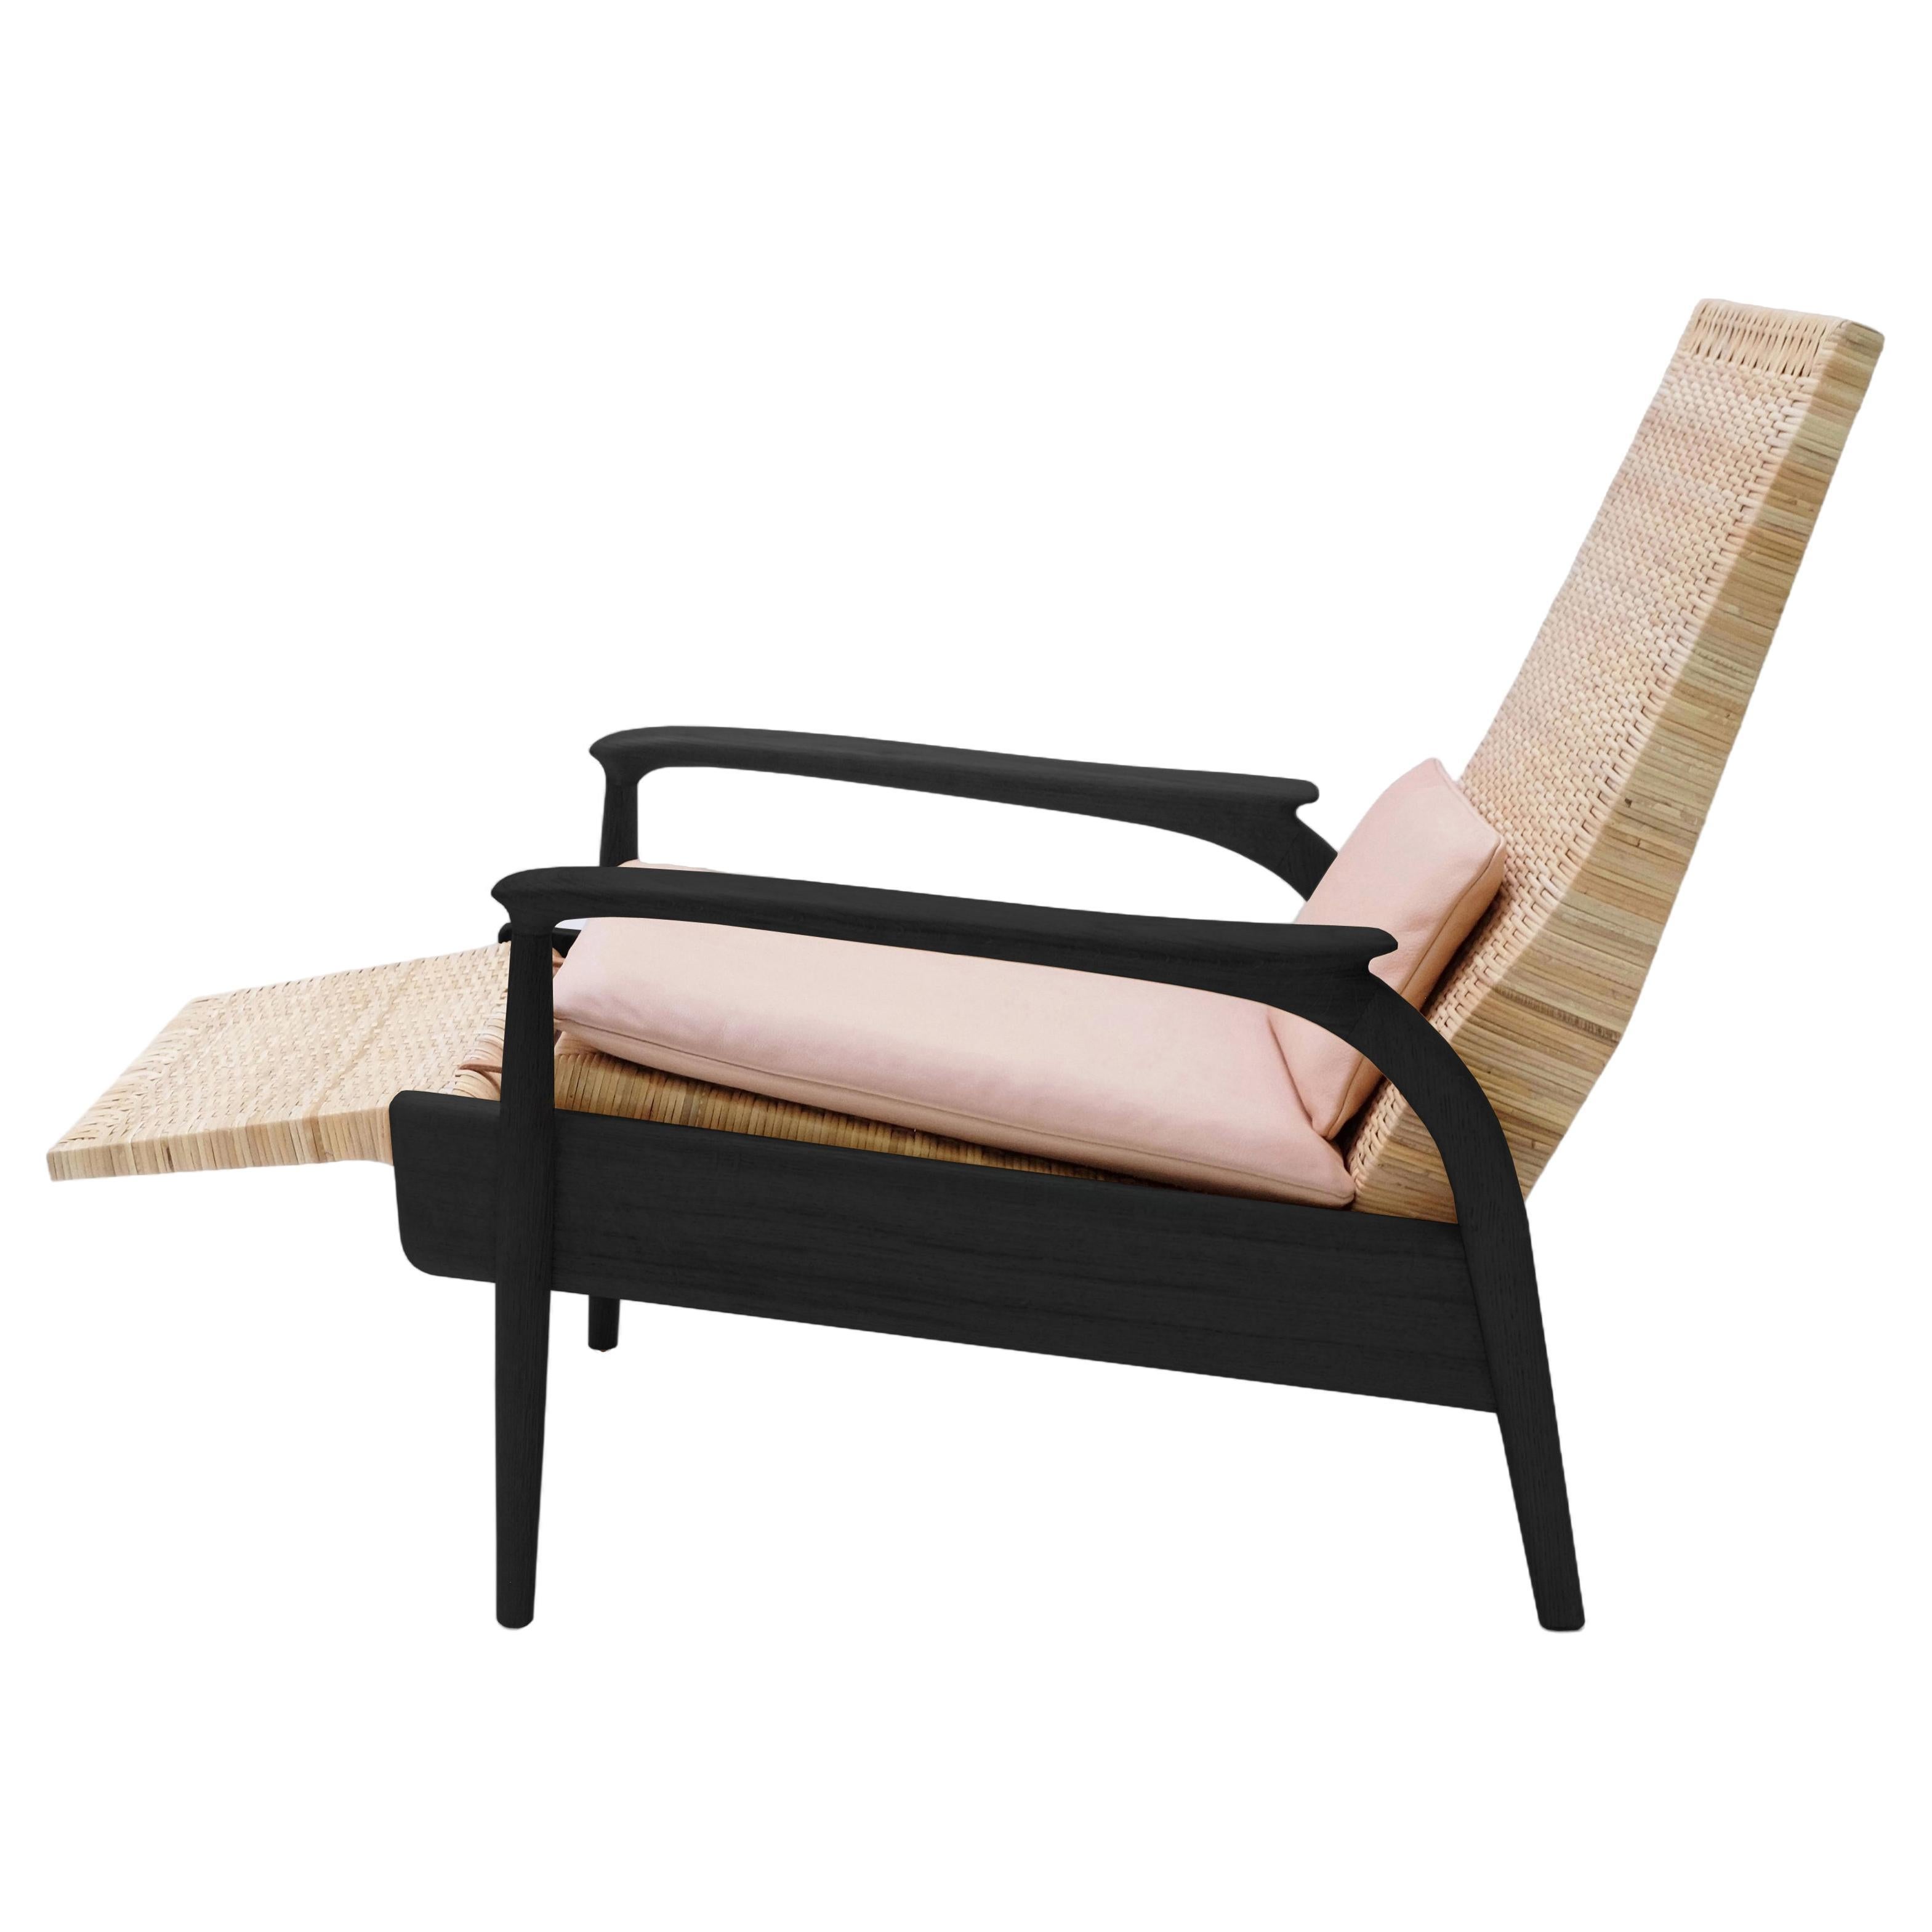 Custom-made Lounge Chair, natural blackended Oak, Natural Cane, Leather Cushions For Sale